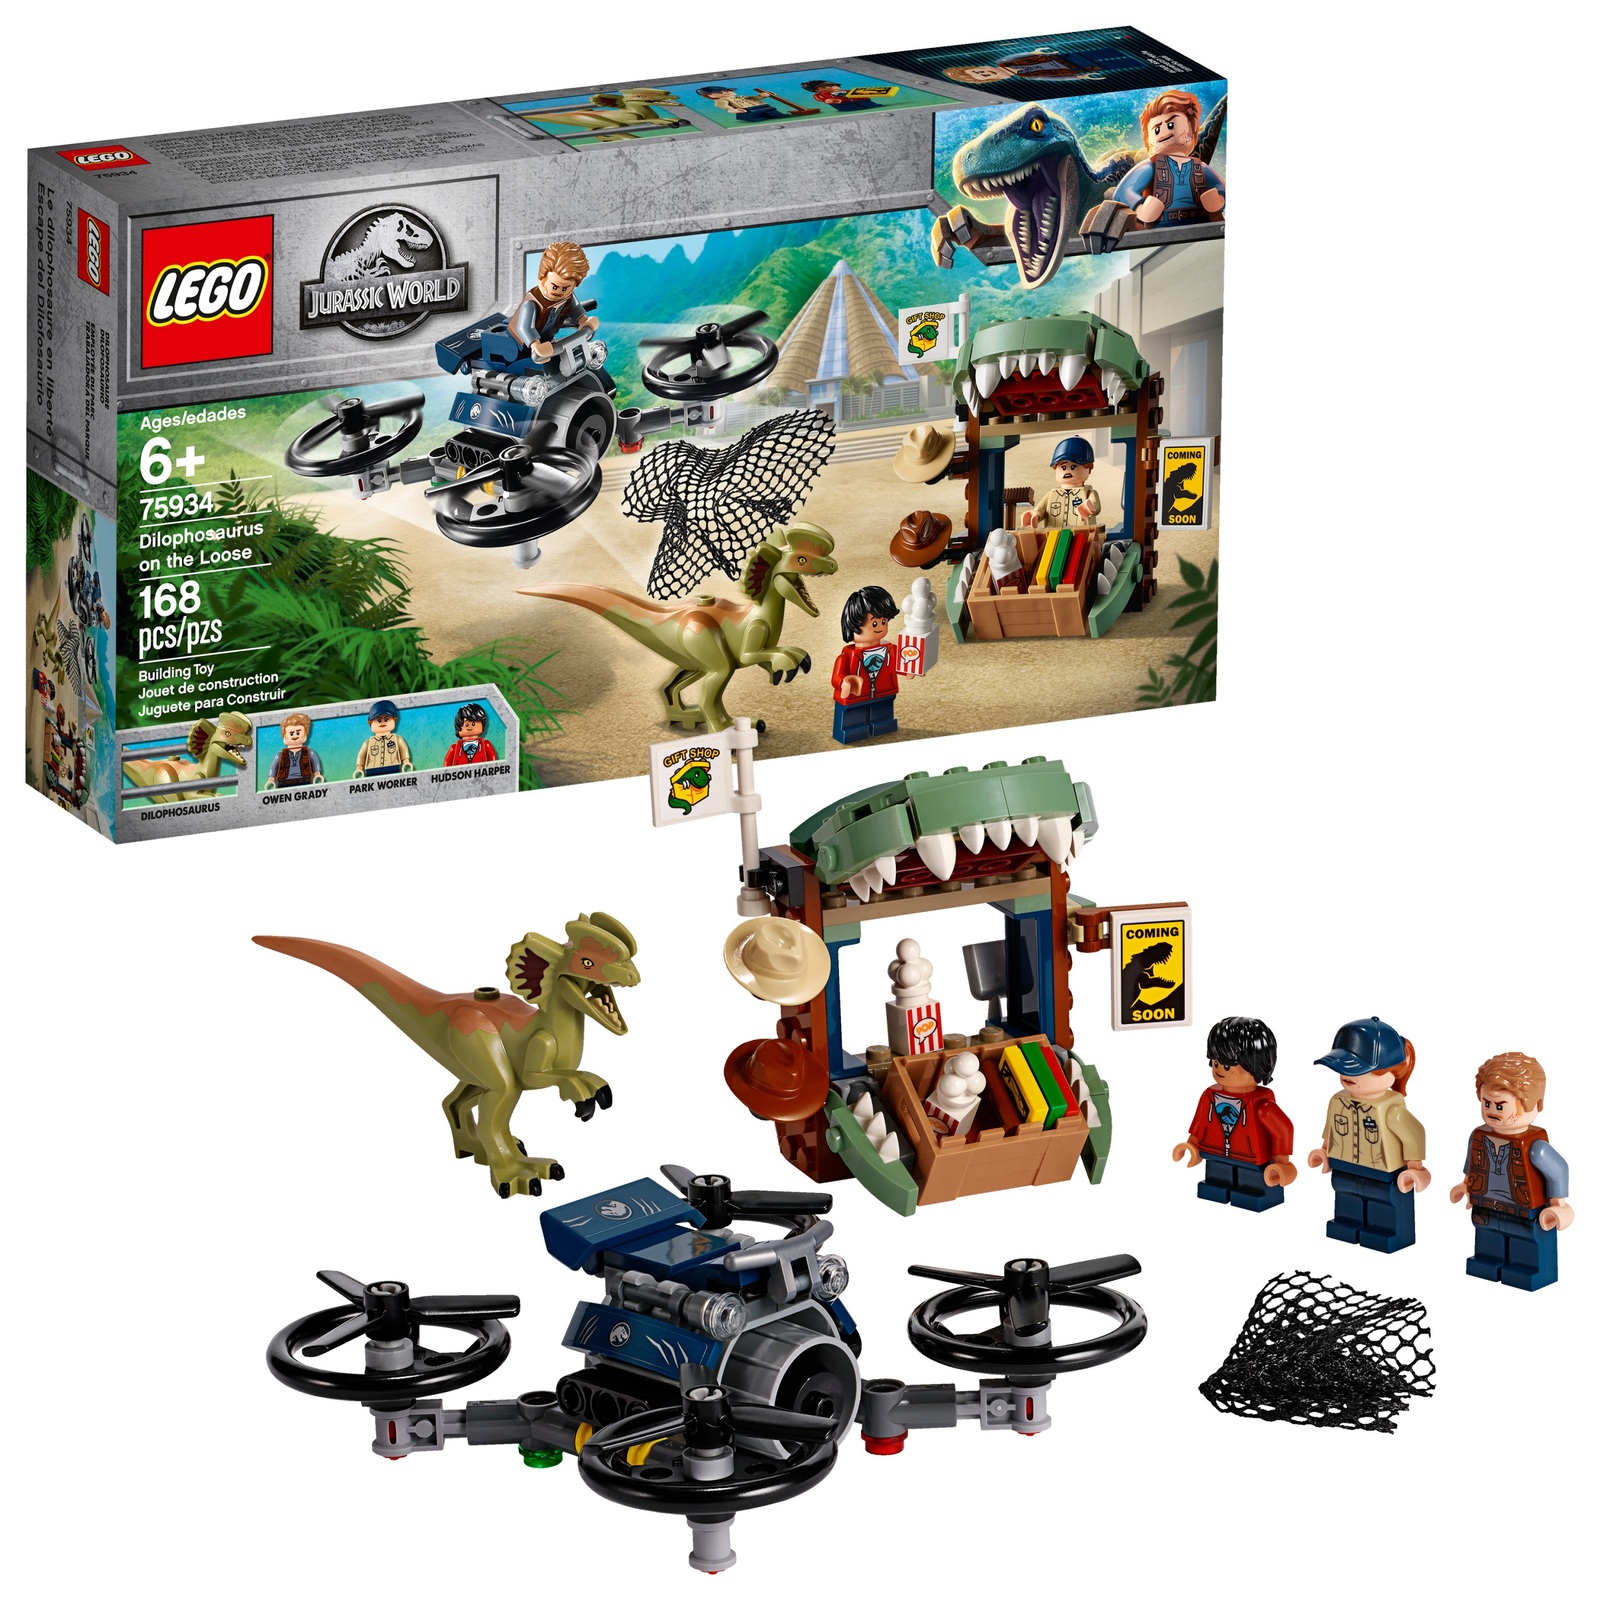 LEGO Jurassic World Dilophosaurus on the Loose 75934 Building Toy (168 Pieces)